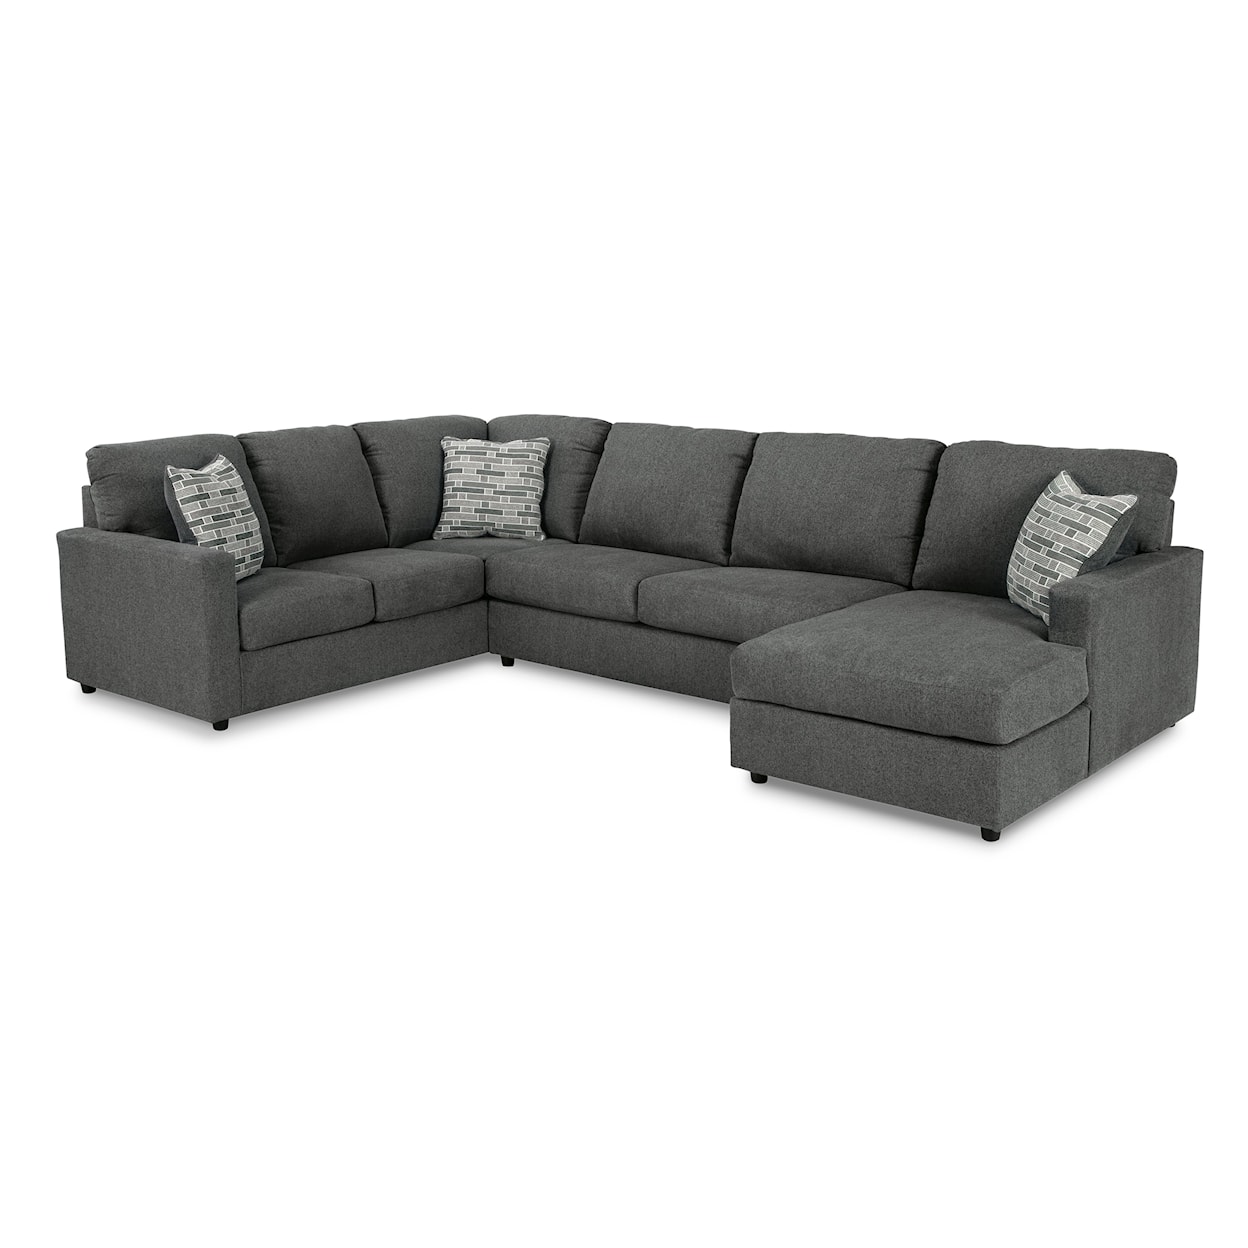 Signature Design by Ashley Edenfield 3-Piece Sectional with Chaise